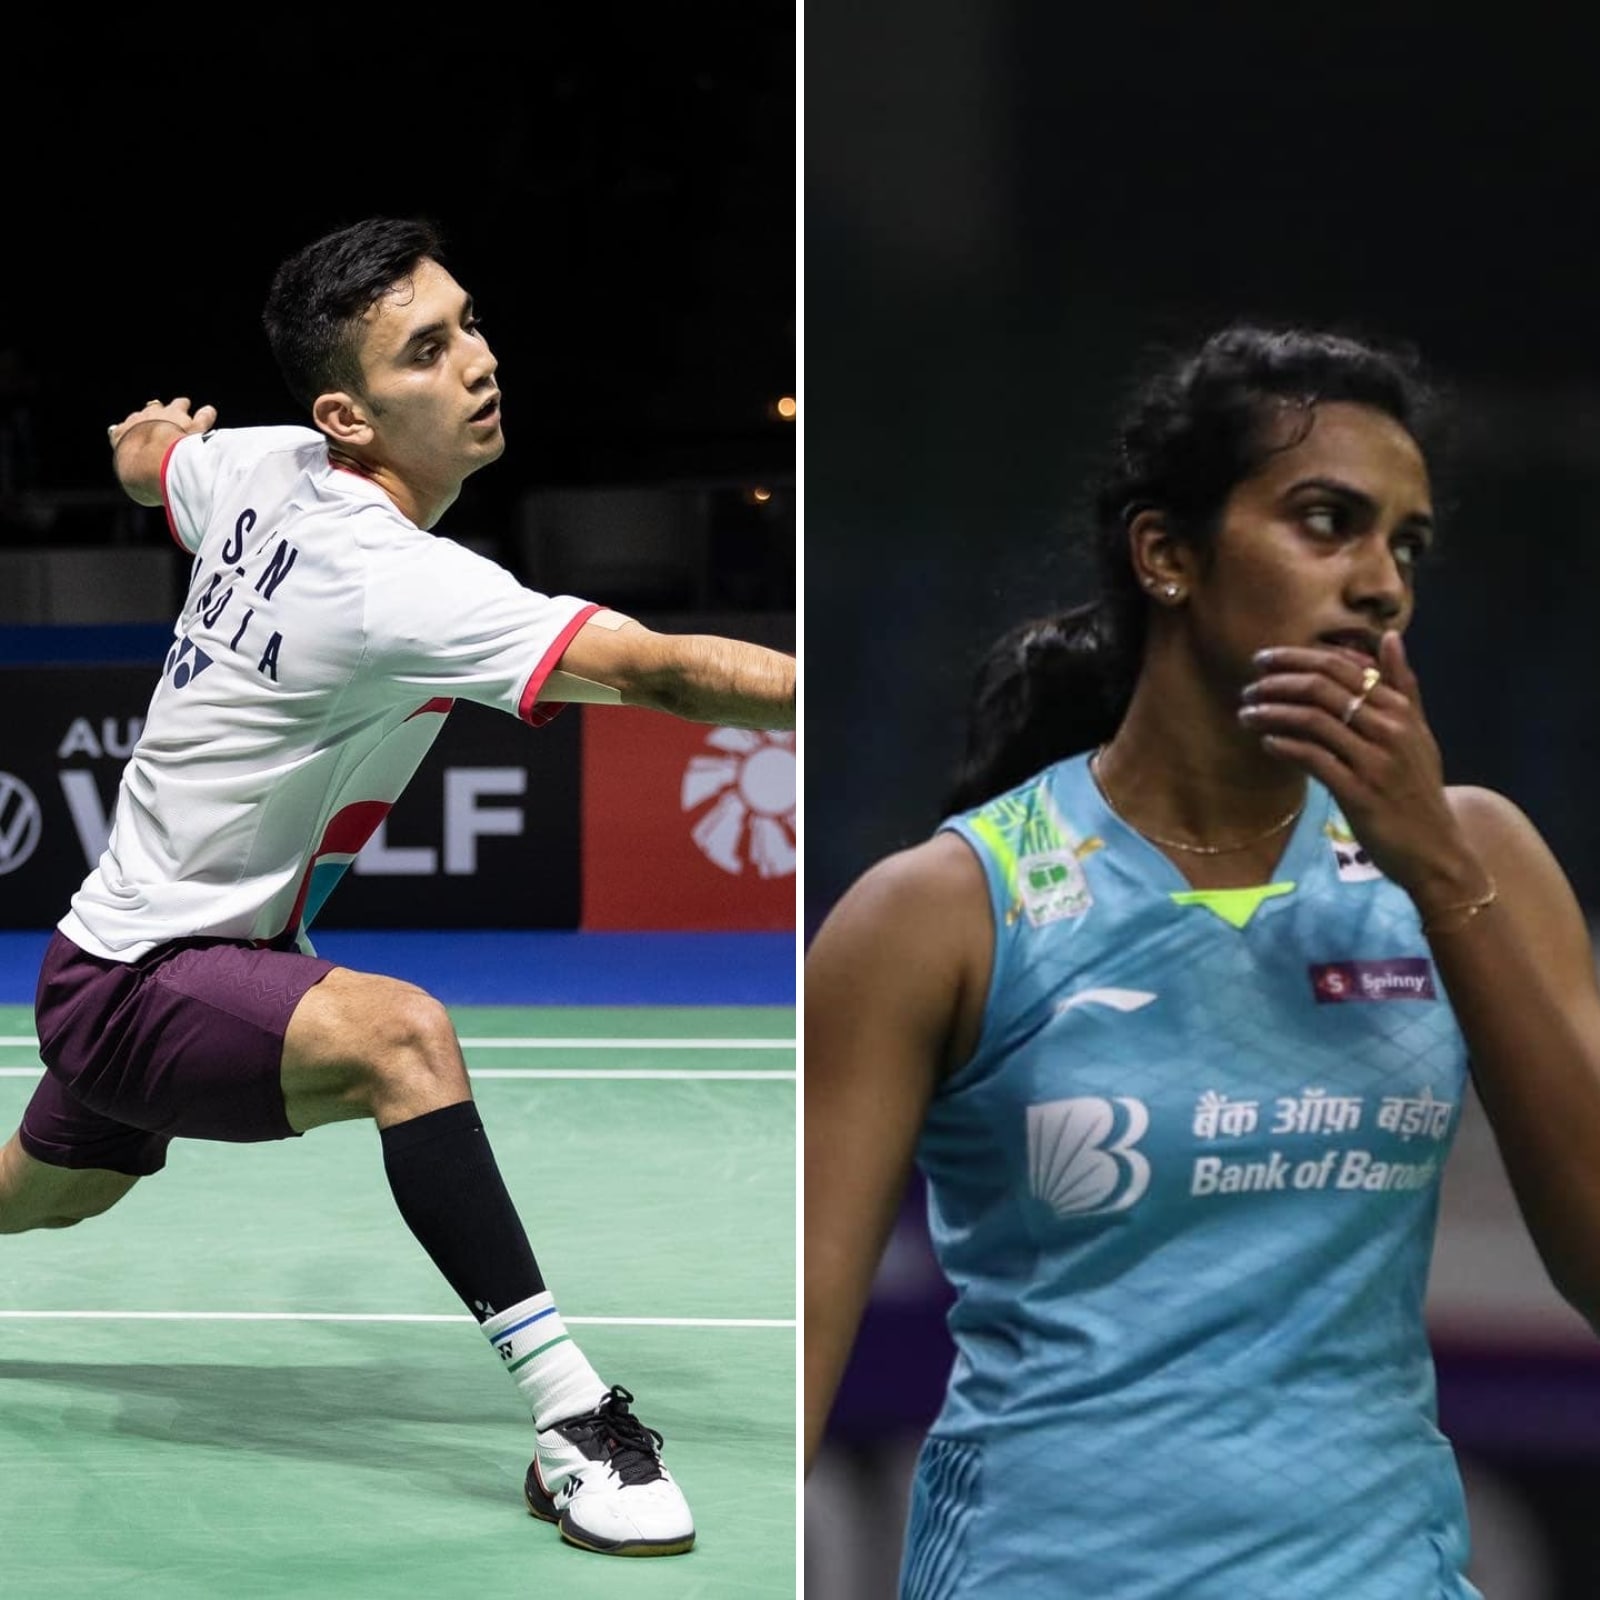 Live Streaming Details For BWF Thomas and Uber Cup Finals 2022